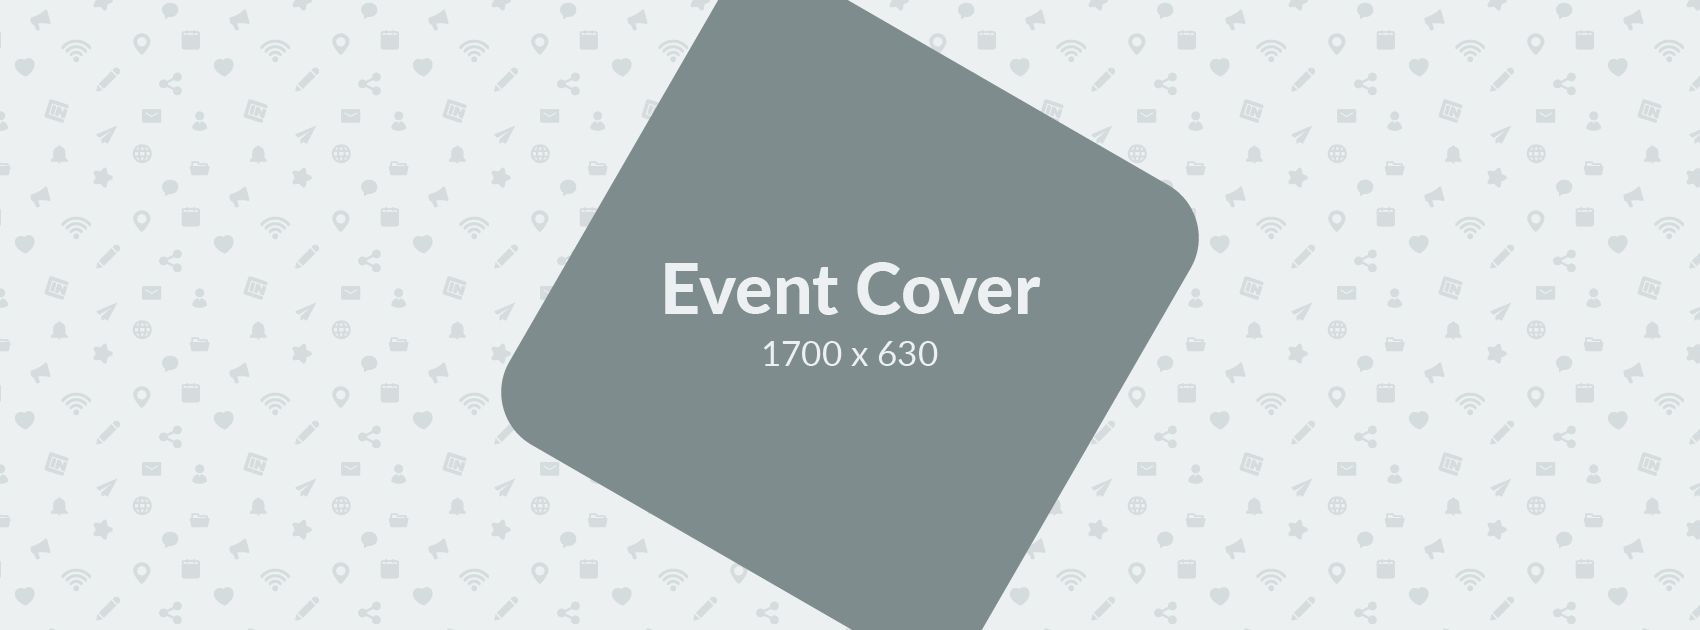 Event cover image